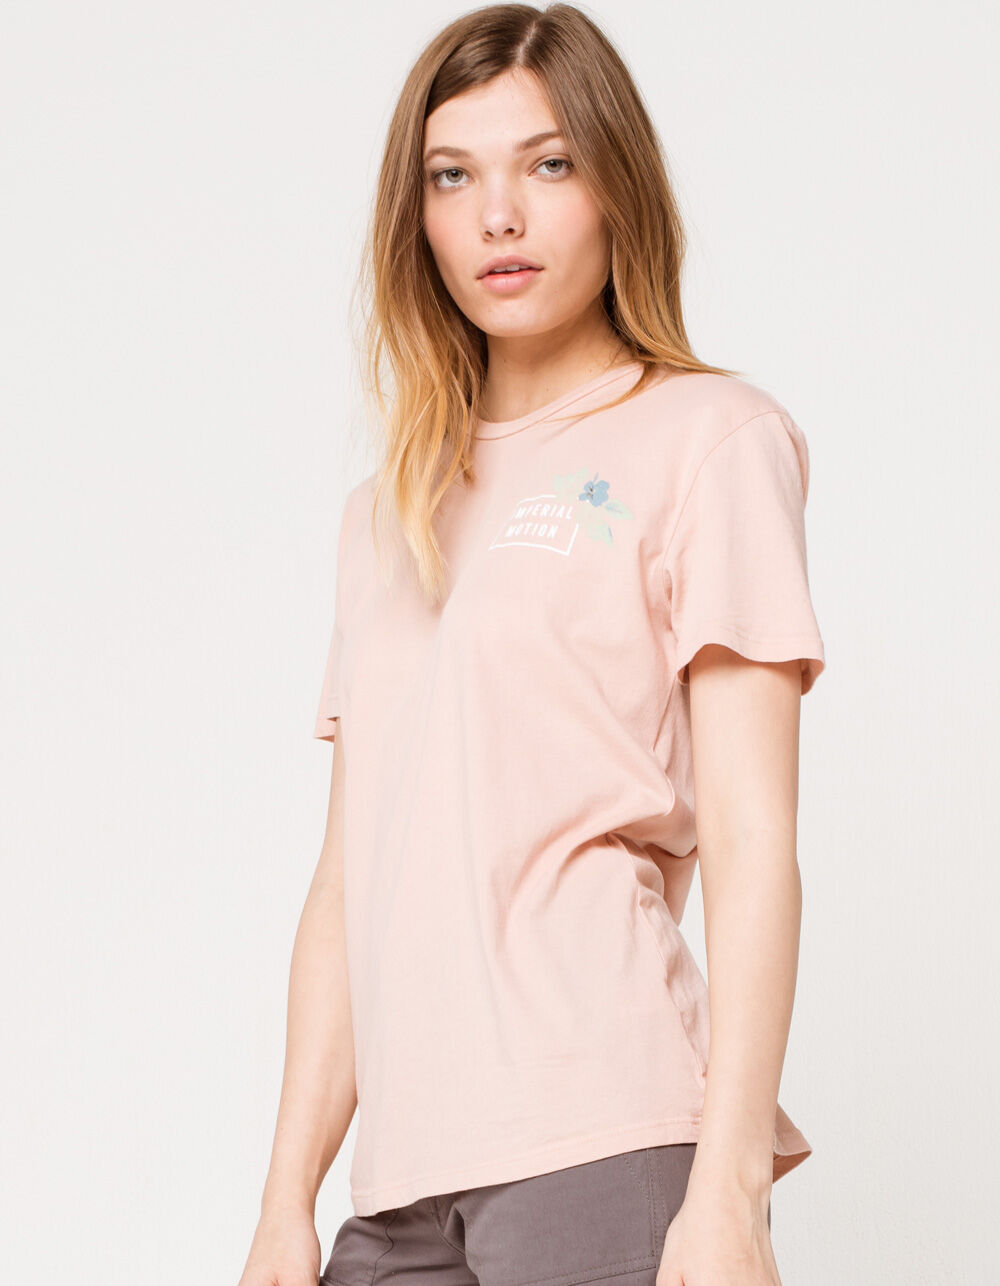 IMPERIAL MOTION Holid Womens Tee - ROSE | Tillys